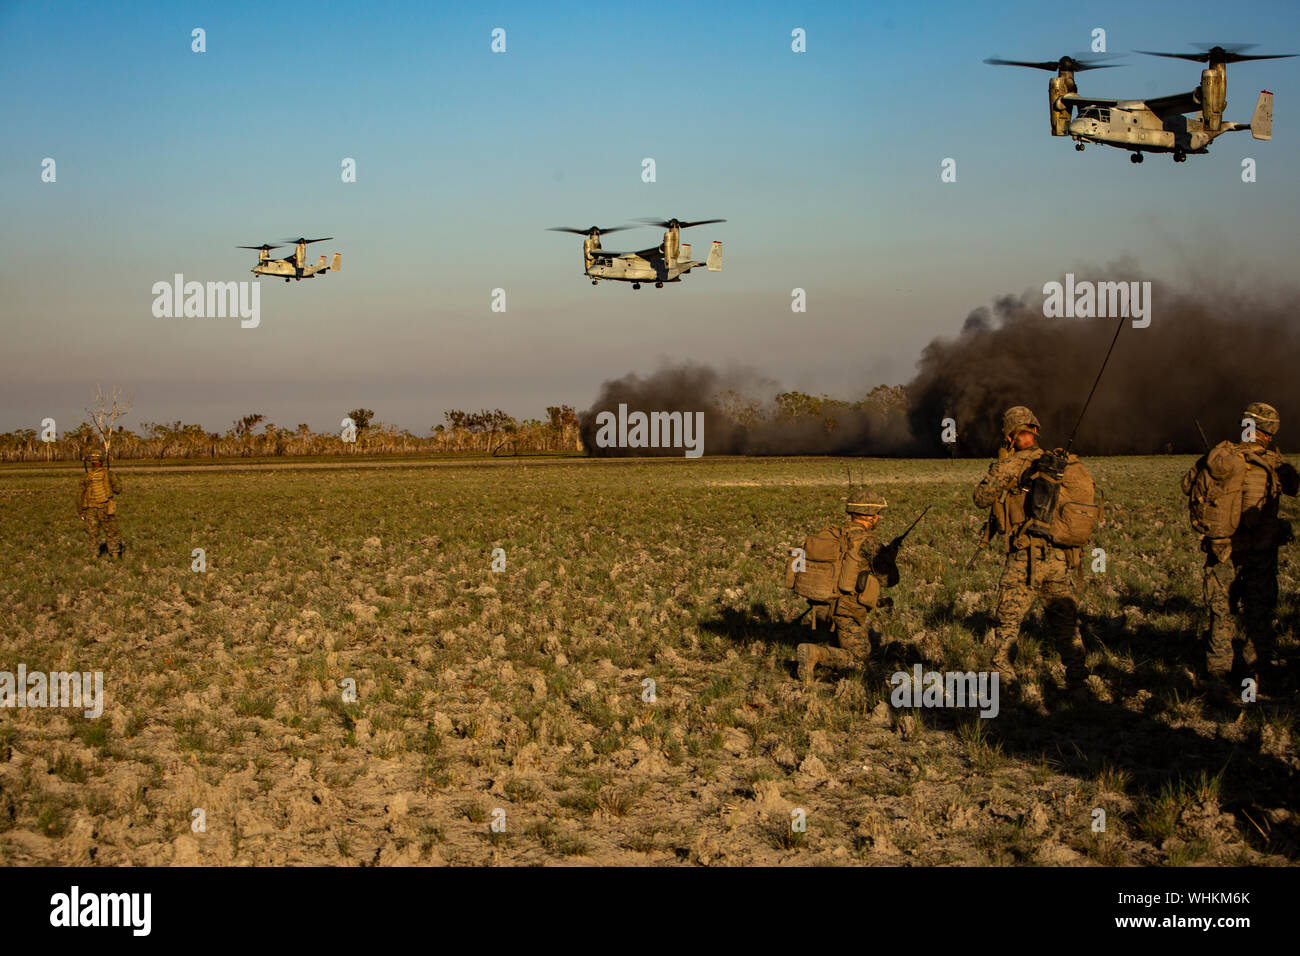 U.S. Marines with the Ground Combat Element, Marine Rotational Force - Darwin, await to be inserted via MV-22 Ospreys during a company raid in Exercise Koolendong at Mount Bundey Training Area, NT, Australia, Aug. 23, 2019. Koolendong is a live-fire bilateral exercise conducted to increase interoperability between U.S. Marines and the Australian Defence Force. (U.S. Marine Corps photo by Lance Cpl. Nicholas Filca) Stock Photo